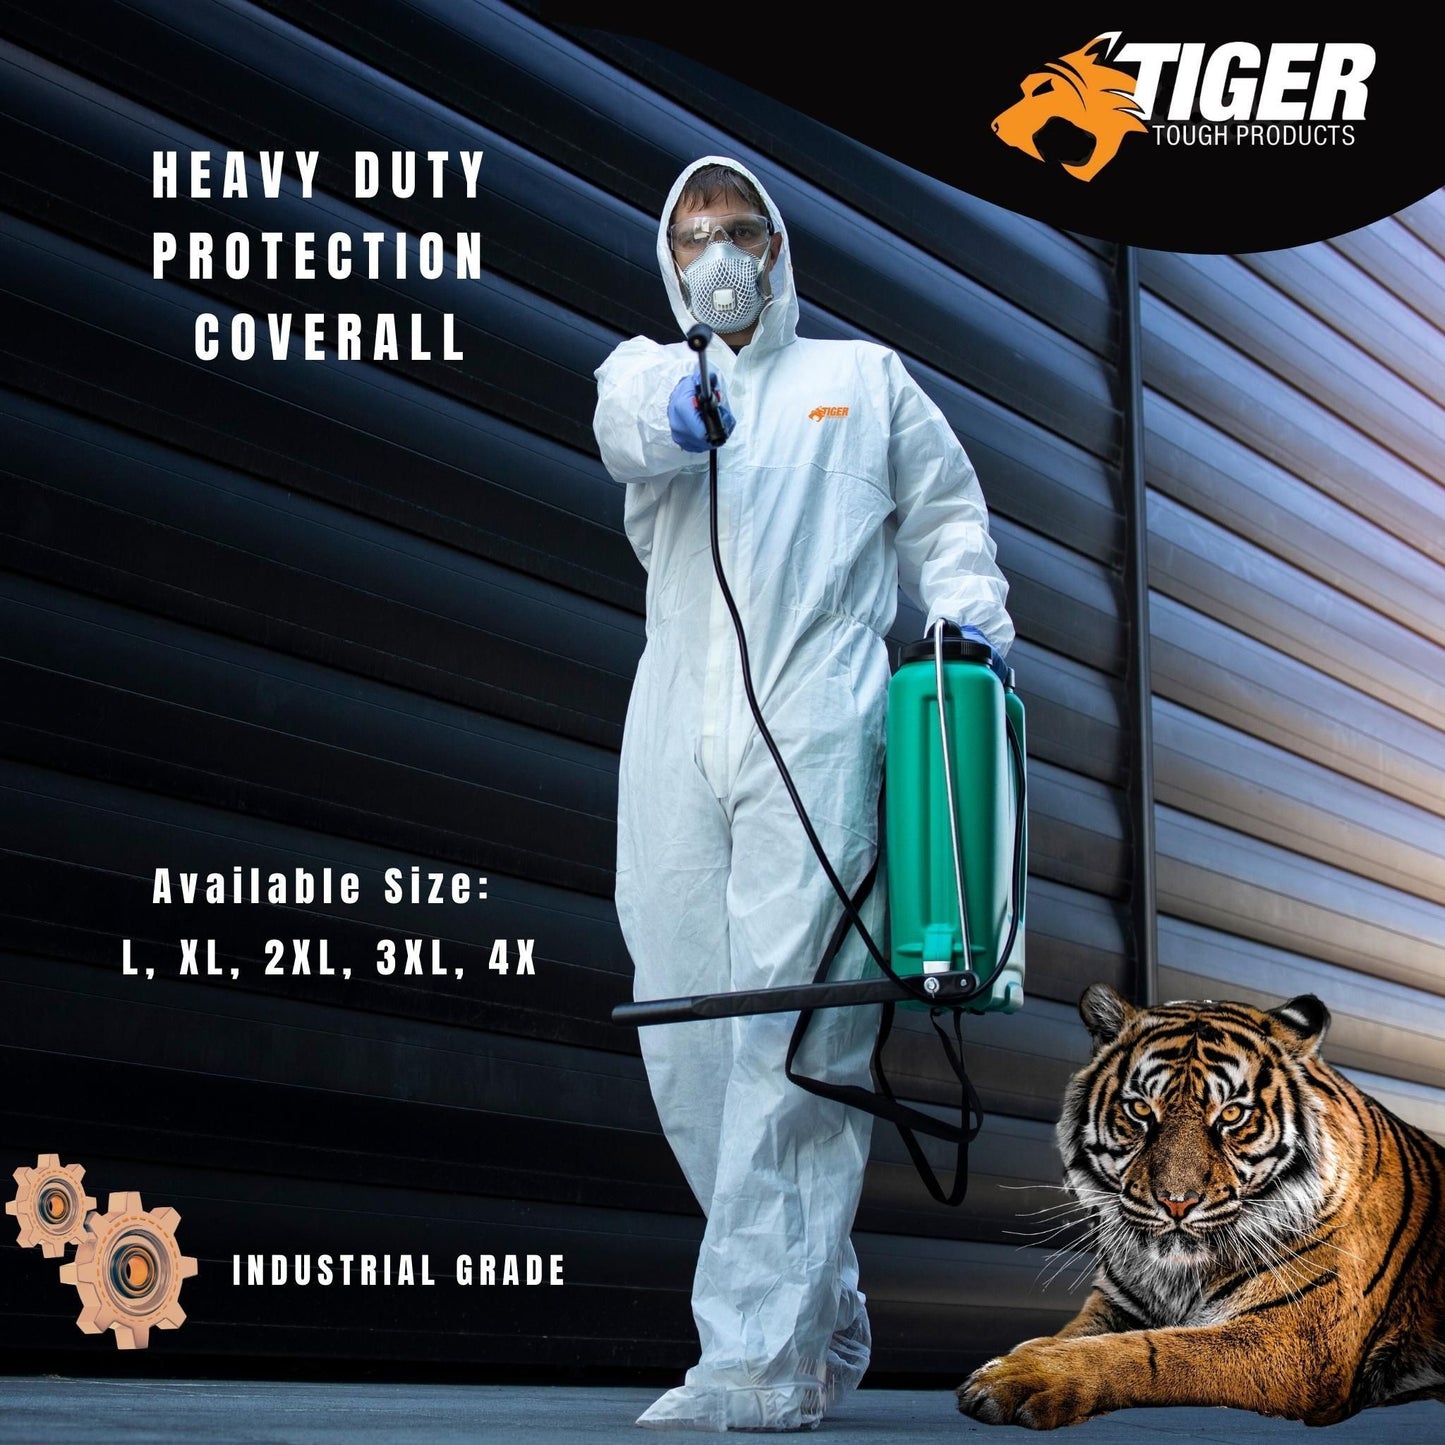 Heavy Duty All Purpose Coveralls. Engineered for Maximum Protection & Comfort. Size L - 4XL (25ct) Misc L,XL,2XL,3XL,4XL